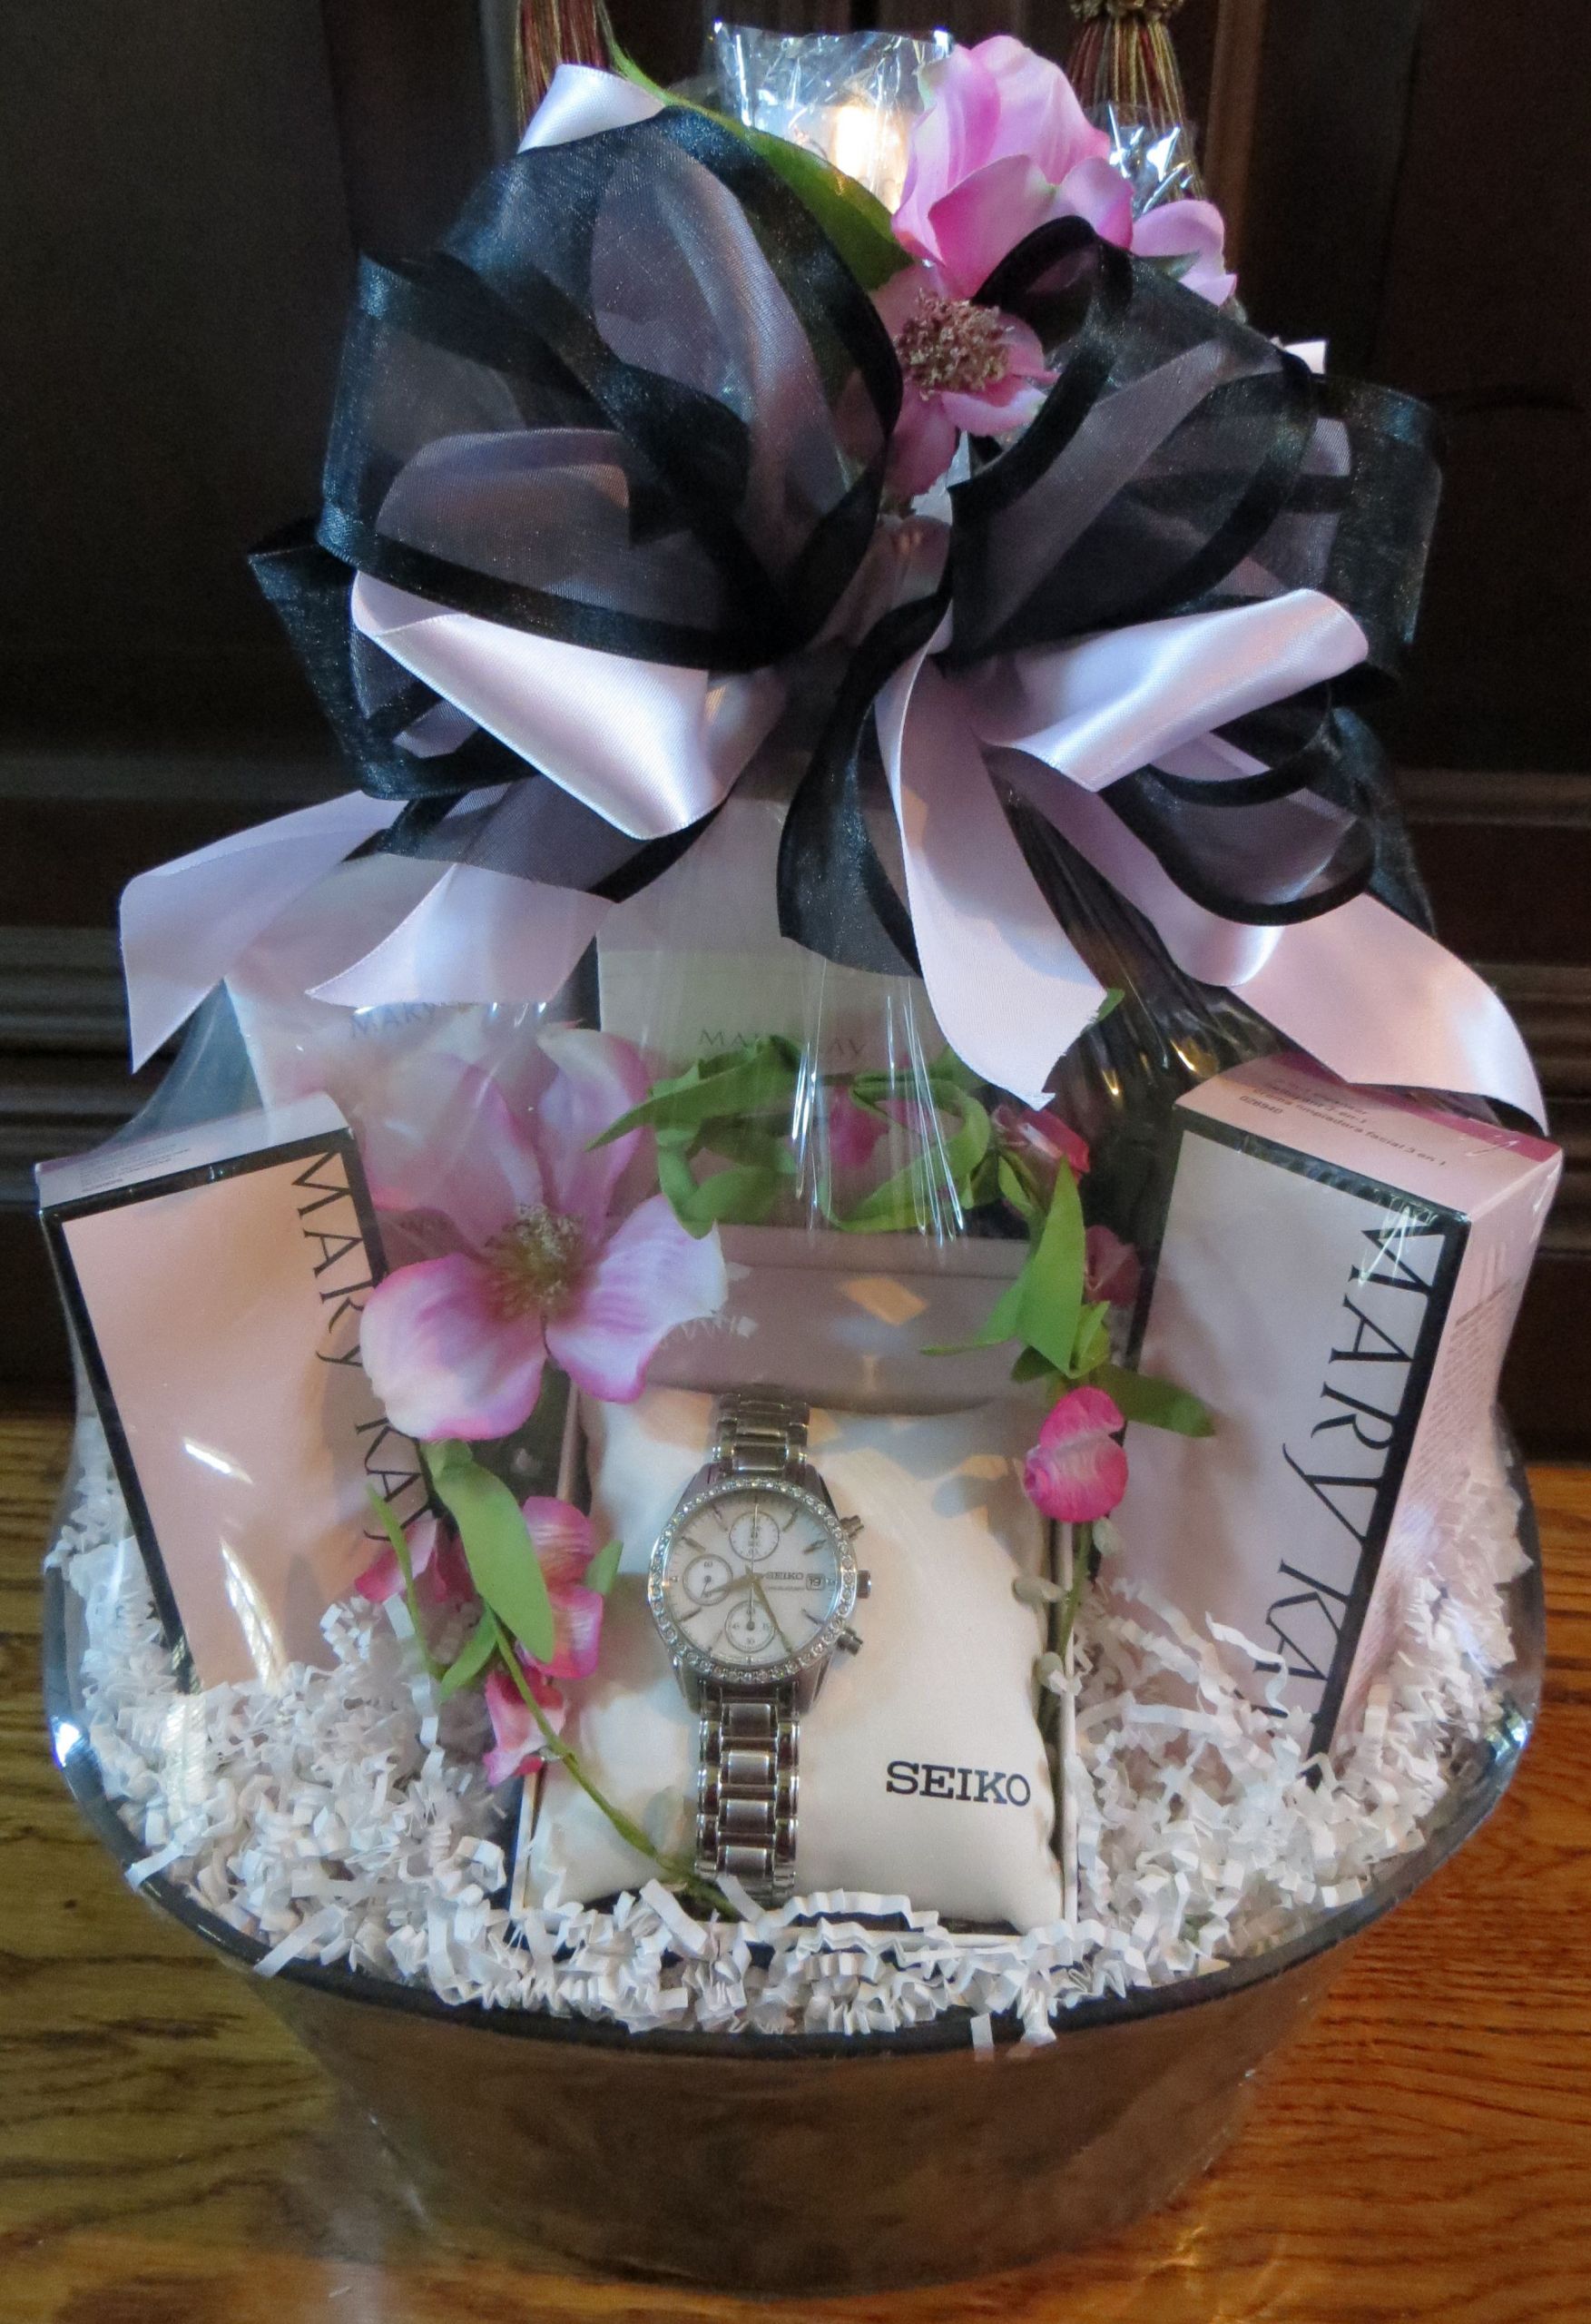 Mary Kay Mother'S Day Gift Basket Ideas
 The Timewise Gift Basket features Mary Kay products and